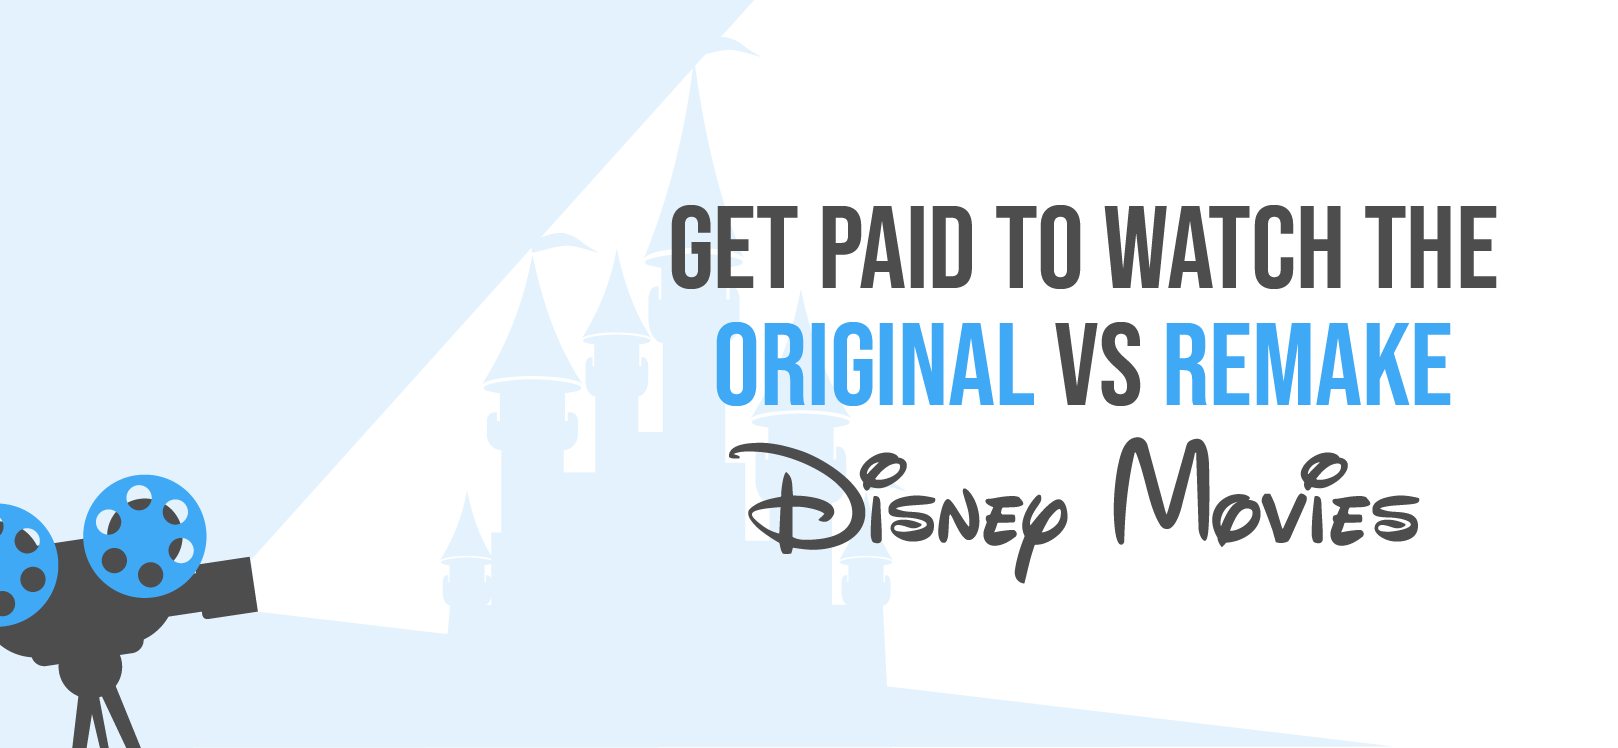 Get Paid to Watch Disney Movies